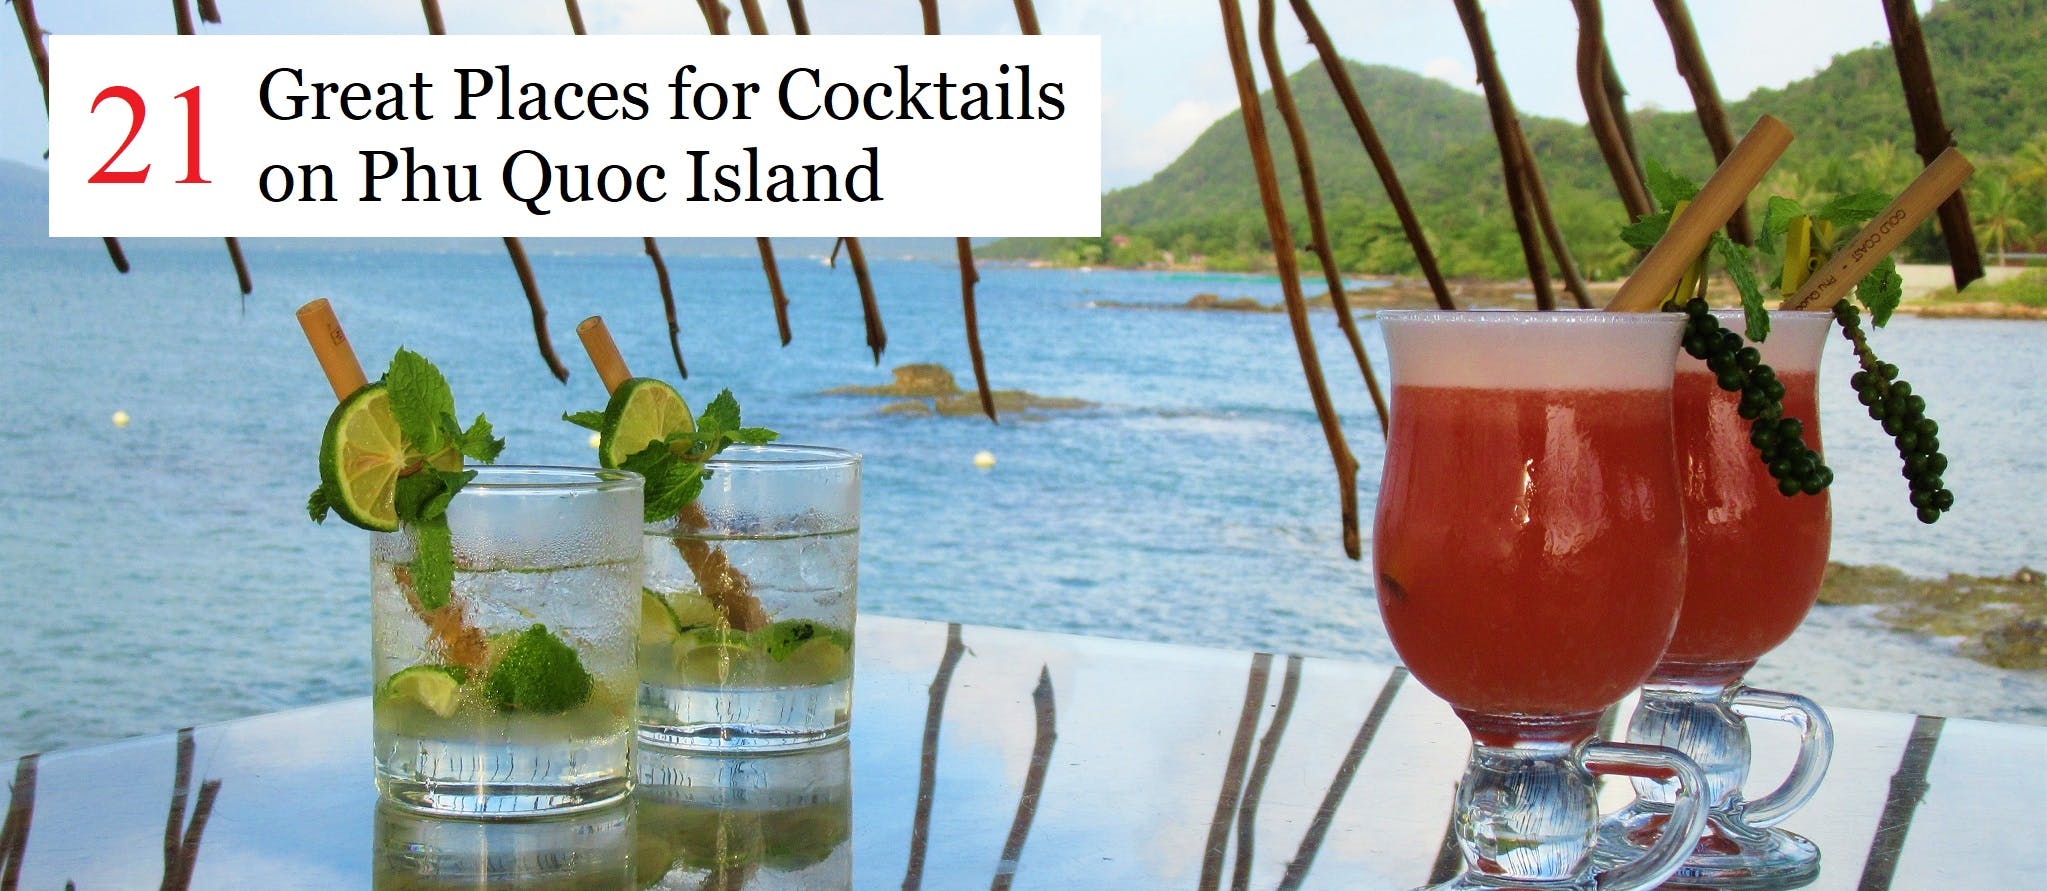 21 Great Places for Cocktails on Phu Quoc Island